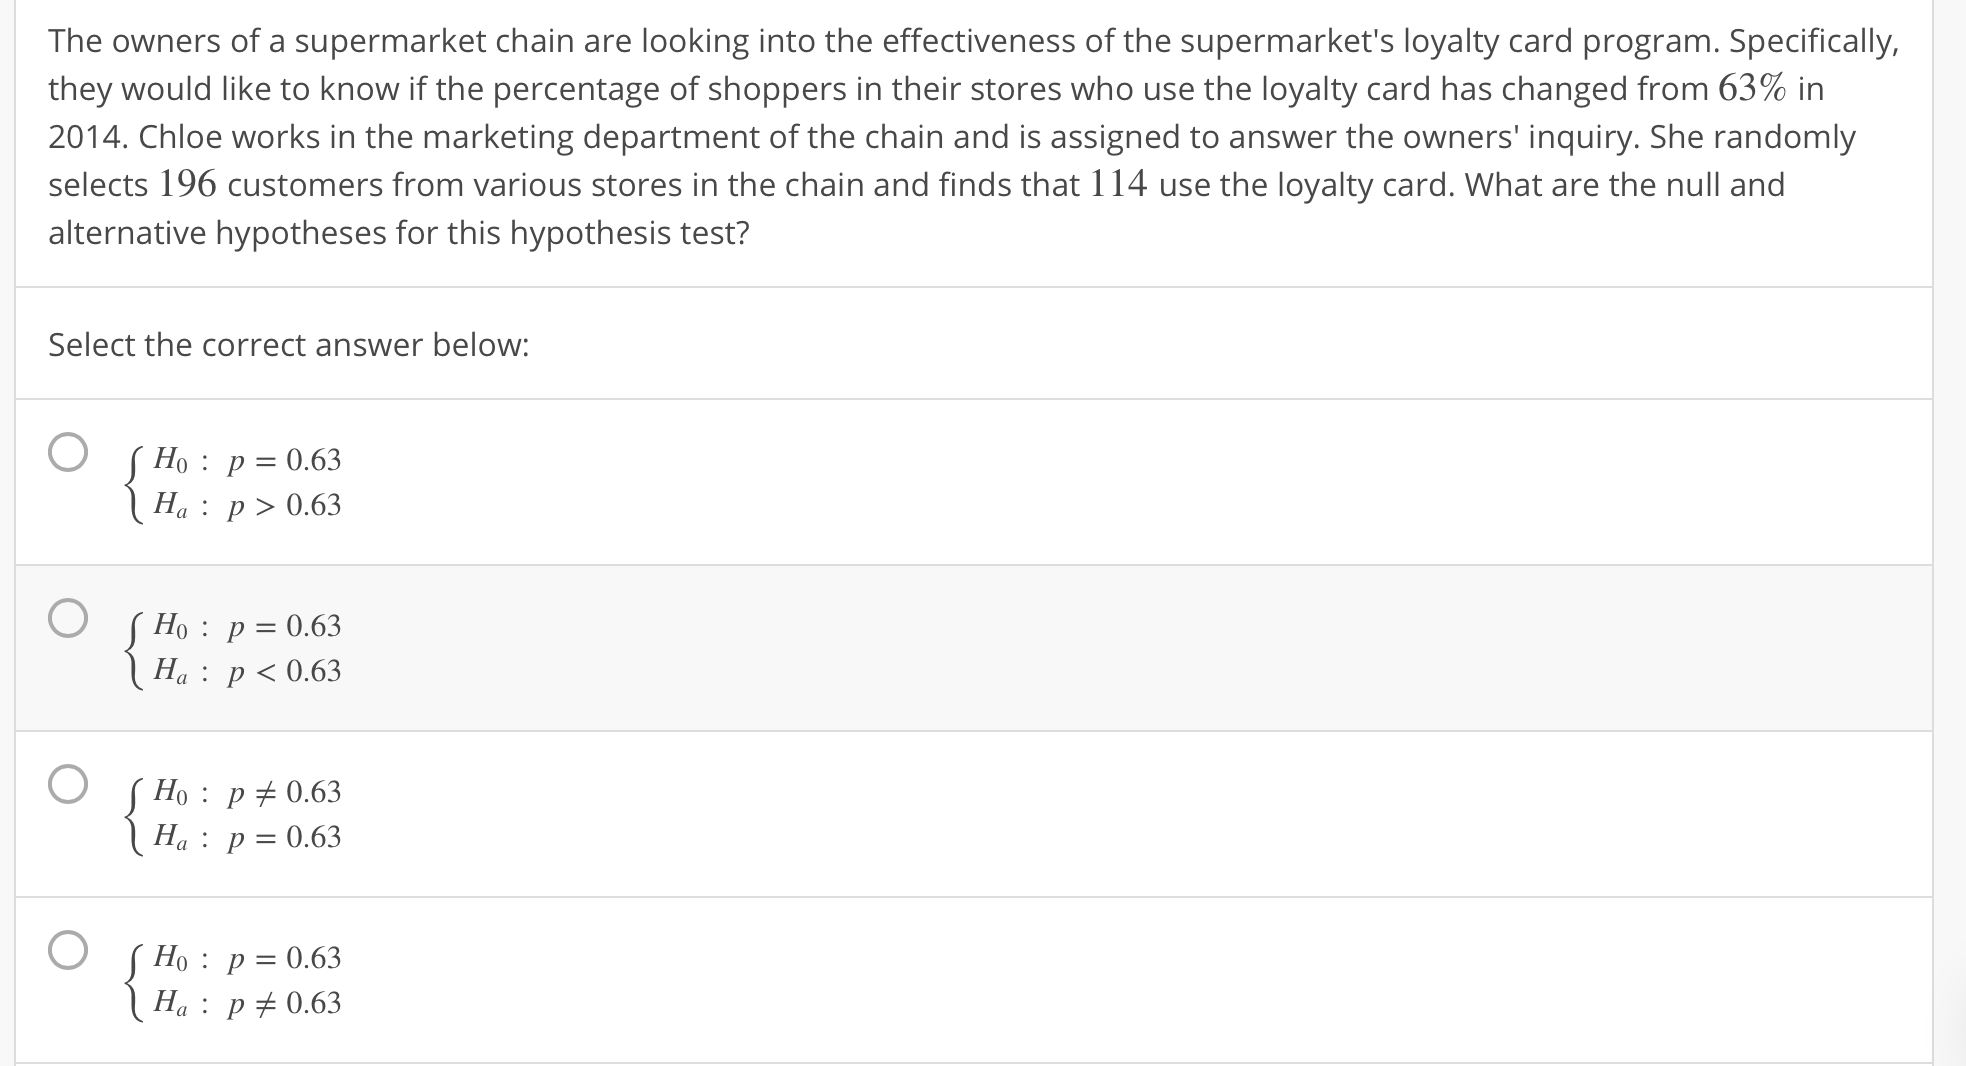 The owners of a supermarket chain are looking into the effectiveness of the supermarket's loyalty card program. Specifically,
they would like to know if the percentage of shoppers in their stores who use the loyalty card has changed from 63% in
2014. Chloe works in the marketing department of the chain and is assigned to answer the owners' inquiry. She randomly
selects 196 customers from various stores in the chain and finds that 114 use the loyalty card. What are the null and
alternative hypotheses for this hypothesis test?
Select the correct answer below:
Ho: p-0.63
Ha: p>0.63
Ho : p-0.63
: 0.63
Ha:p0.63
Ho: p: 063
H: p0.63
